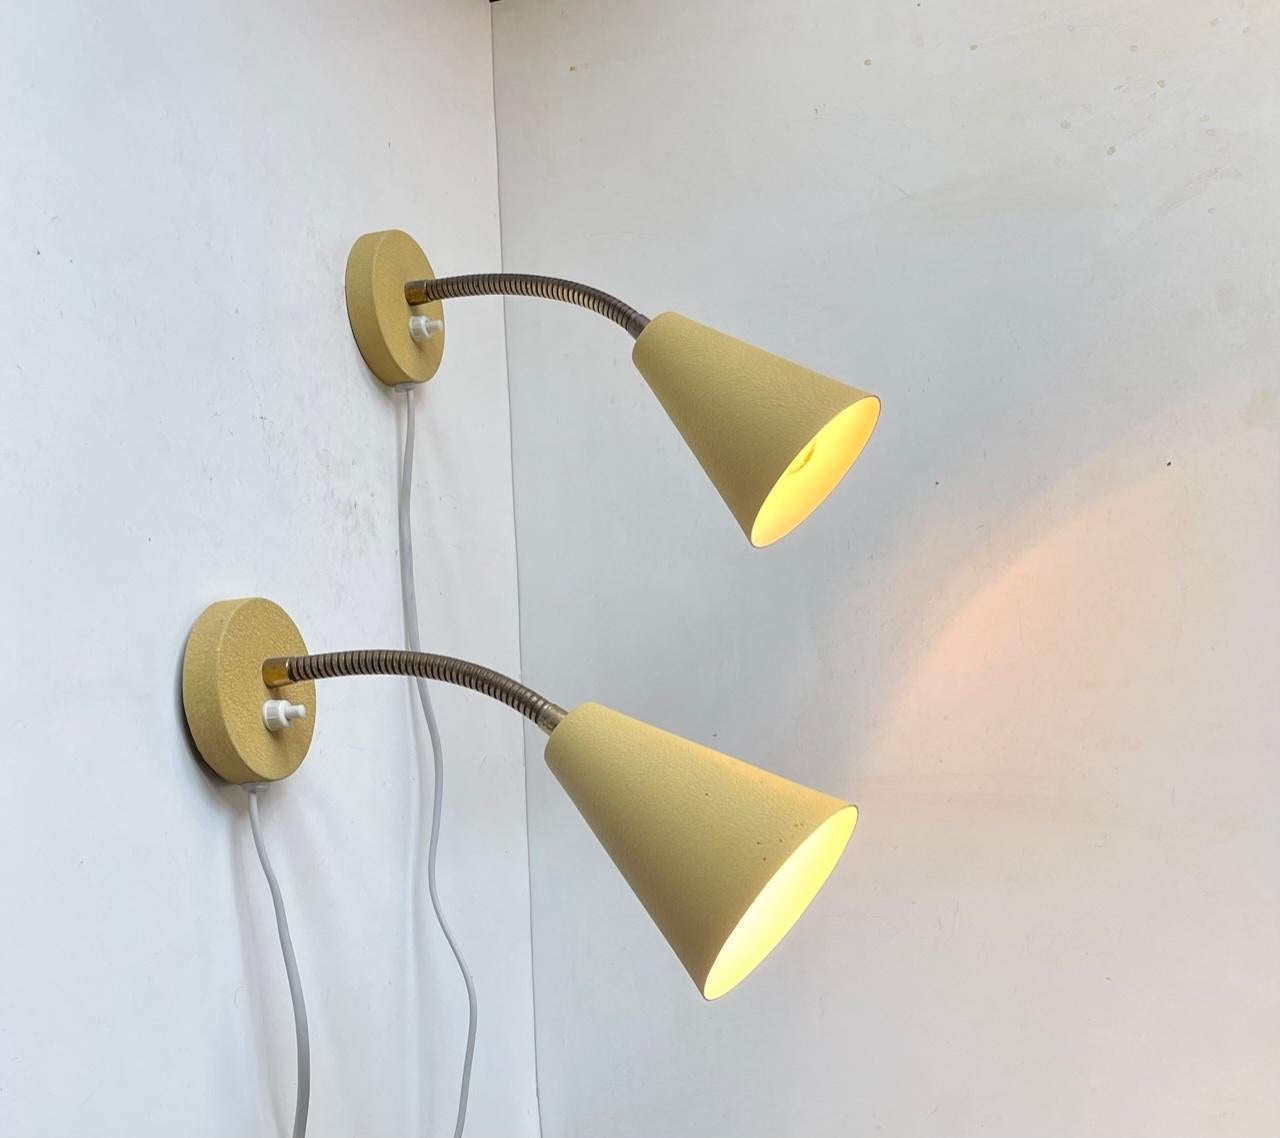 Fully adjustable wall lamps made from Aluminium applied with a 1950s characteristic pastel yellow texture paint (all original). The flexible goose-necks are made from brass. Very clean almost NOS condition and very rare to find 1950s sconces this